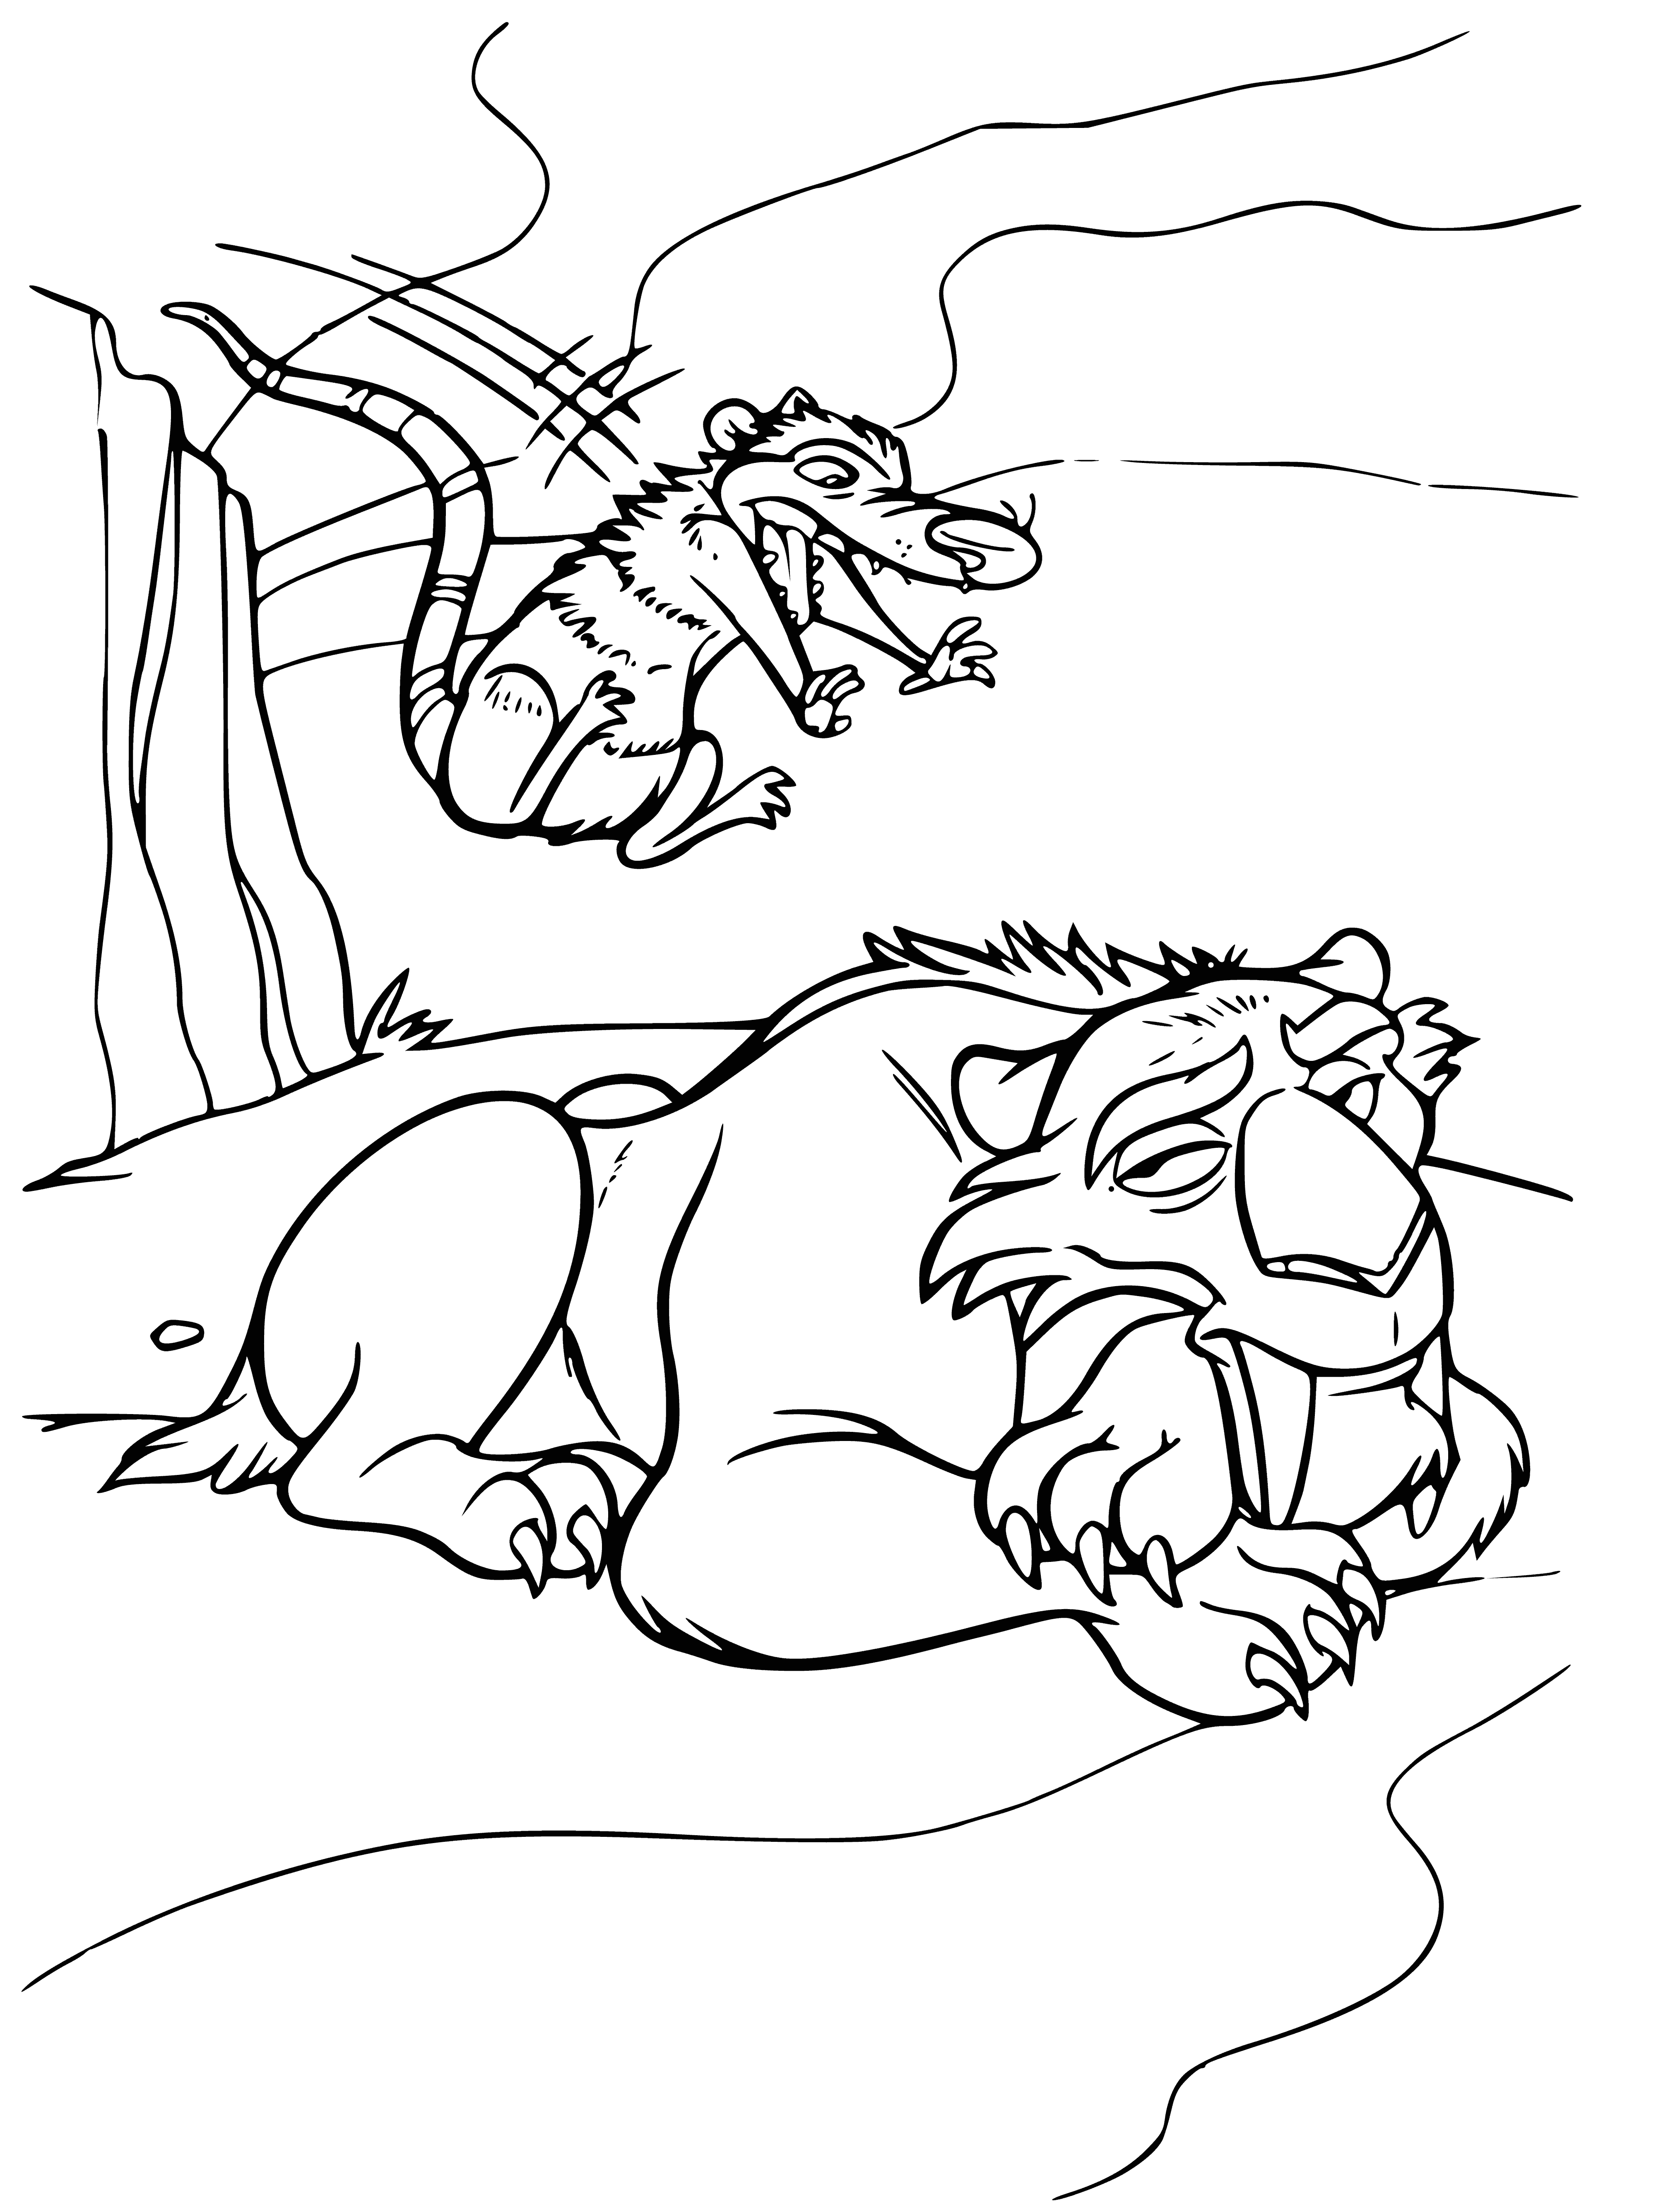 coloring page: Diego's stuck to an ice block, confused and scared. His tail hangs and ears are pressed against his head.